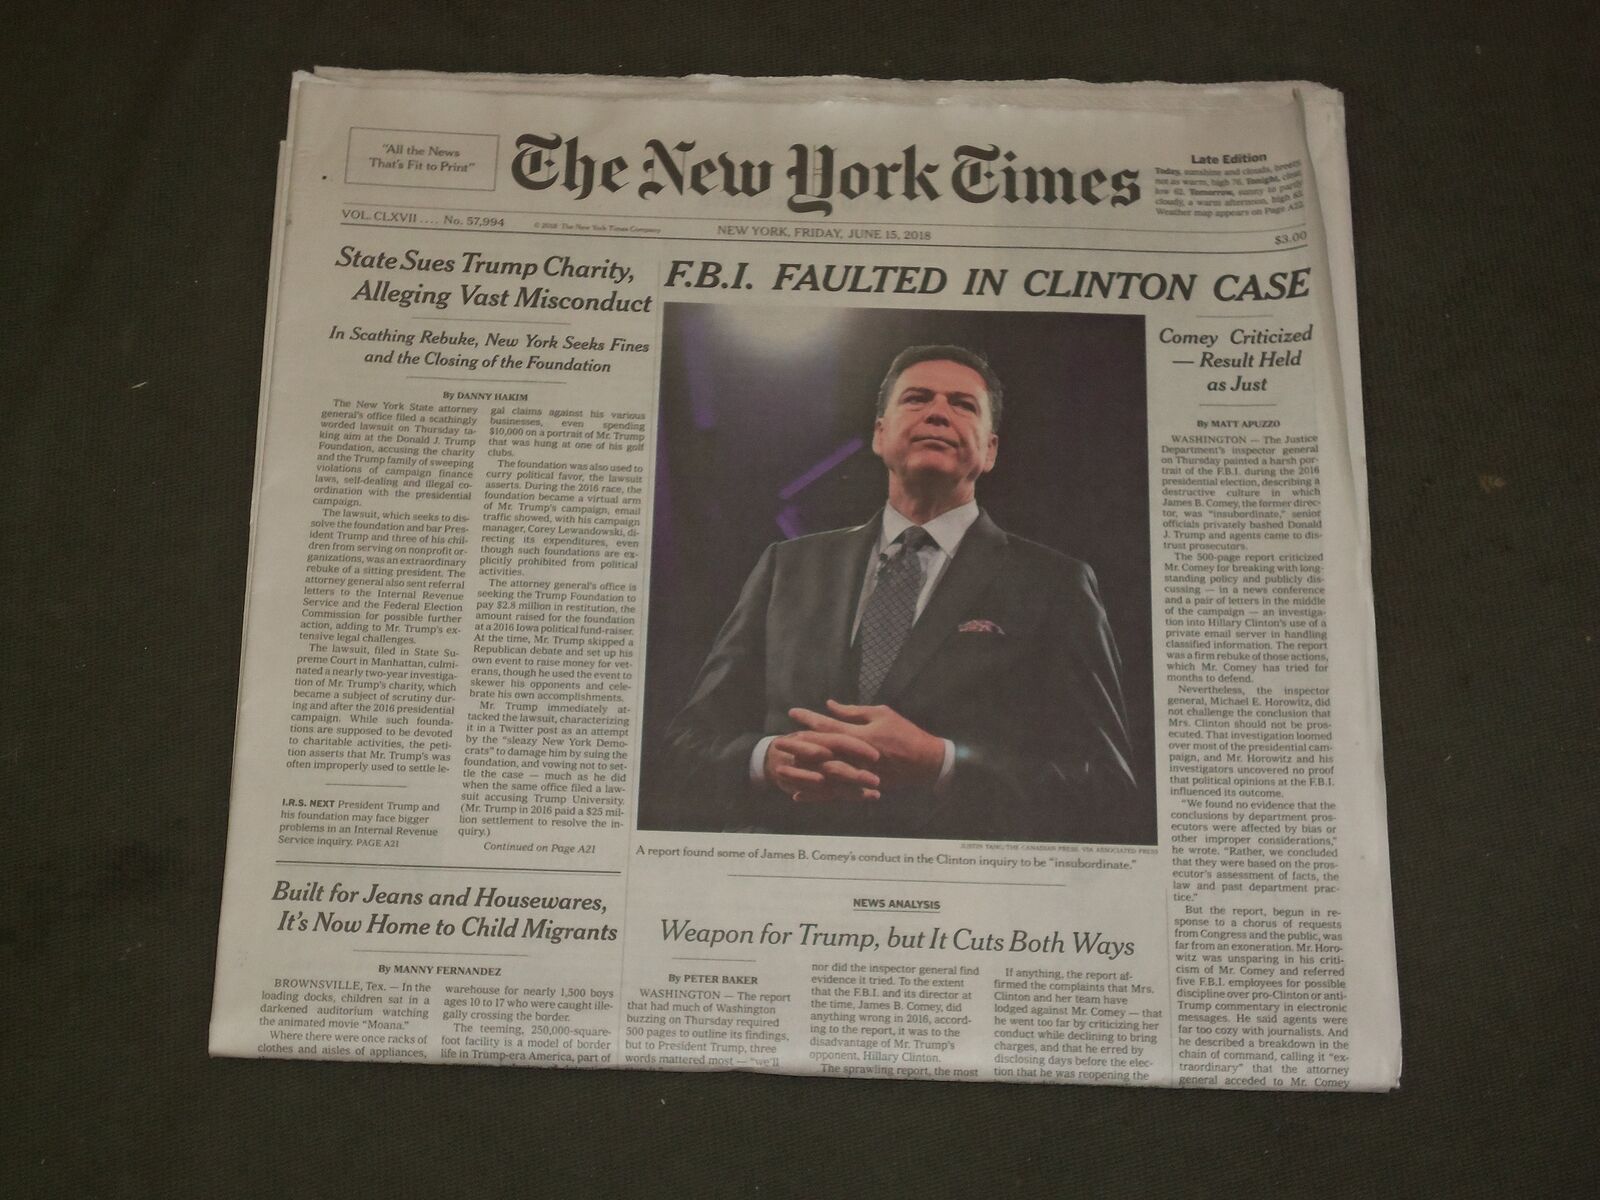 2018 JUNE 15 NEW YORK TIMES- FBI FAULTED IN CLINTON CASE- NYS SUES TRUMP CHARITY